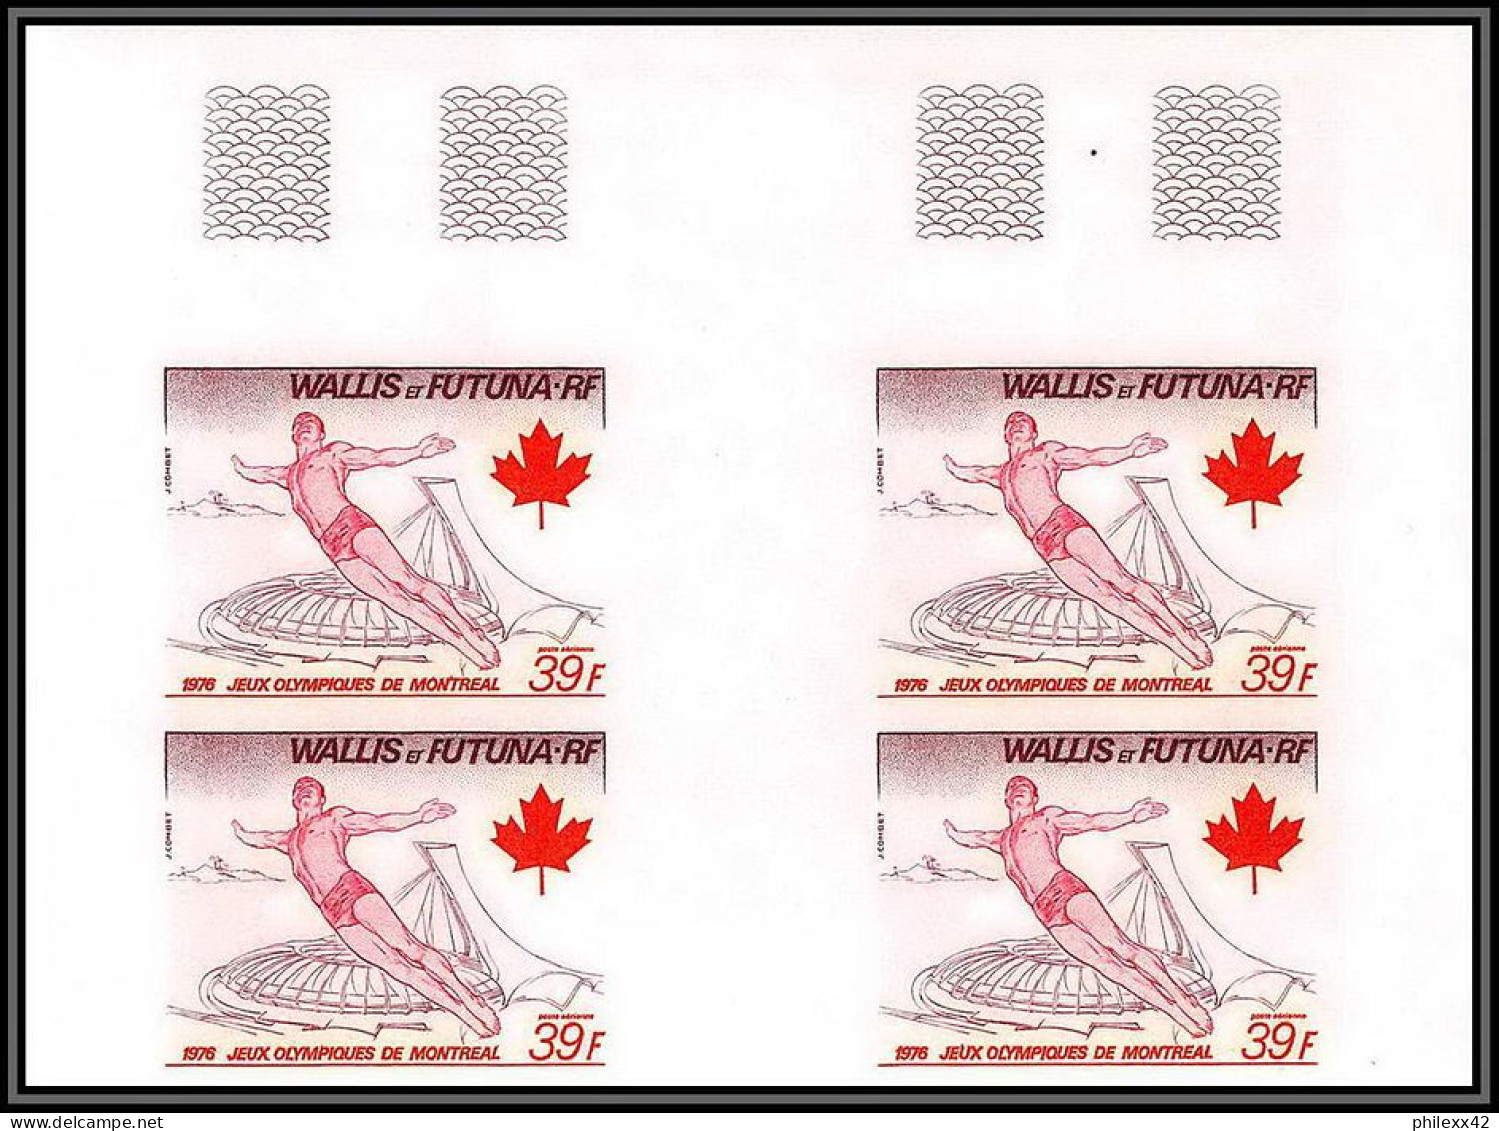 91822a Wallis Et Futuna PA N° 73 Plongeon Diving Montreal 76 Jeux Olympiques Olympic Bloc 4 Non Dentelé Imperf ** MNH - Imperforates, Proofs & Errors